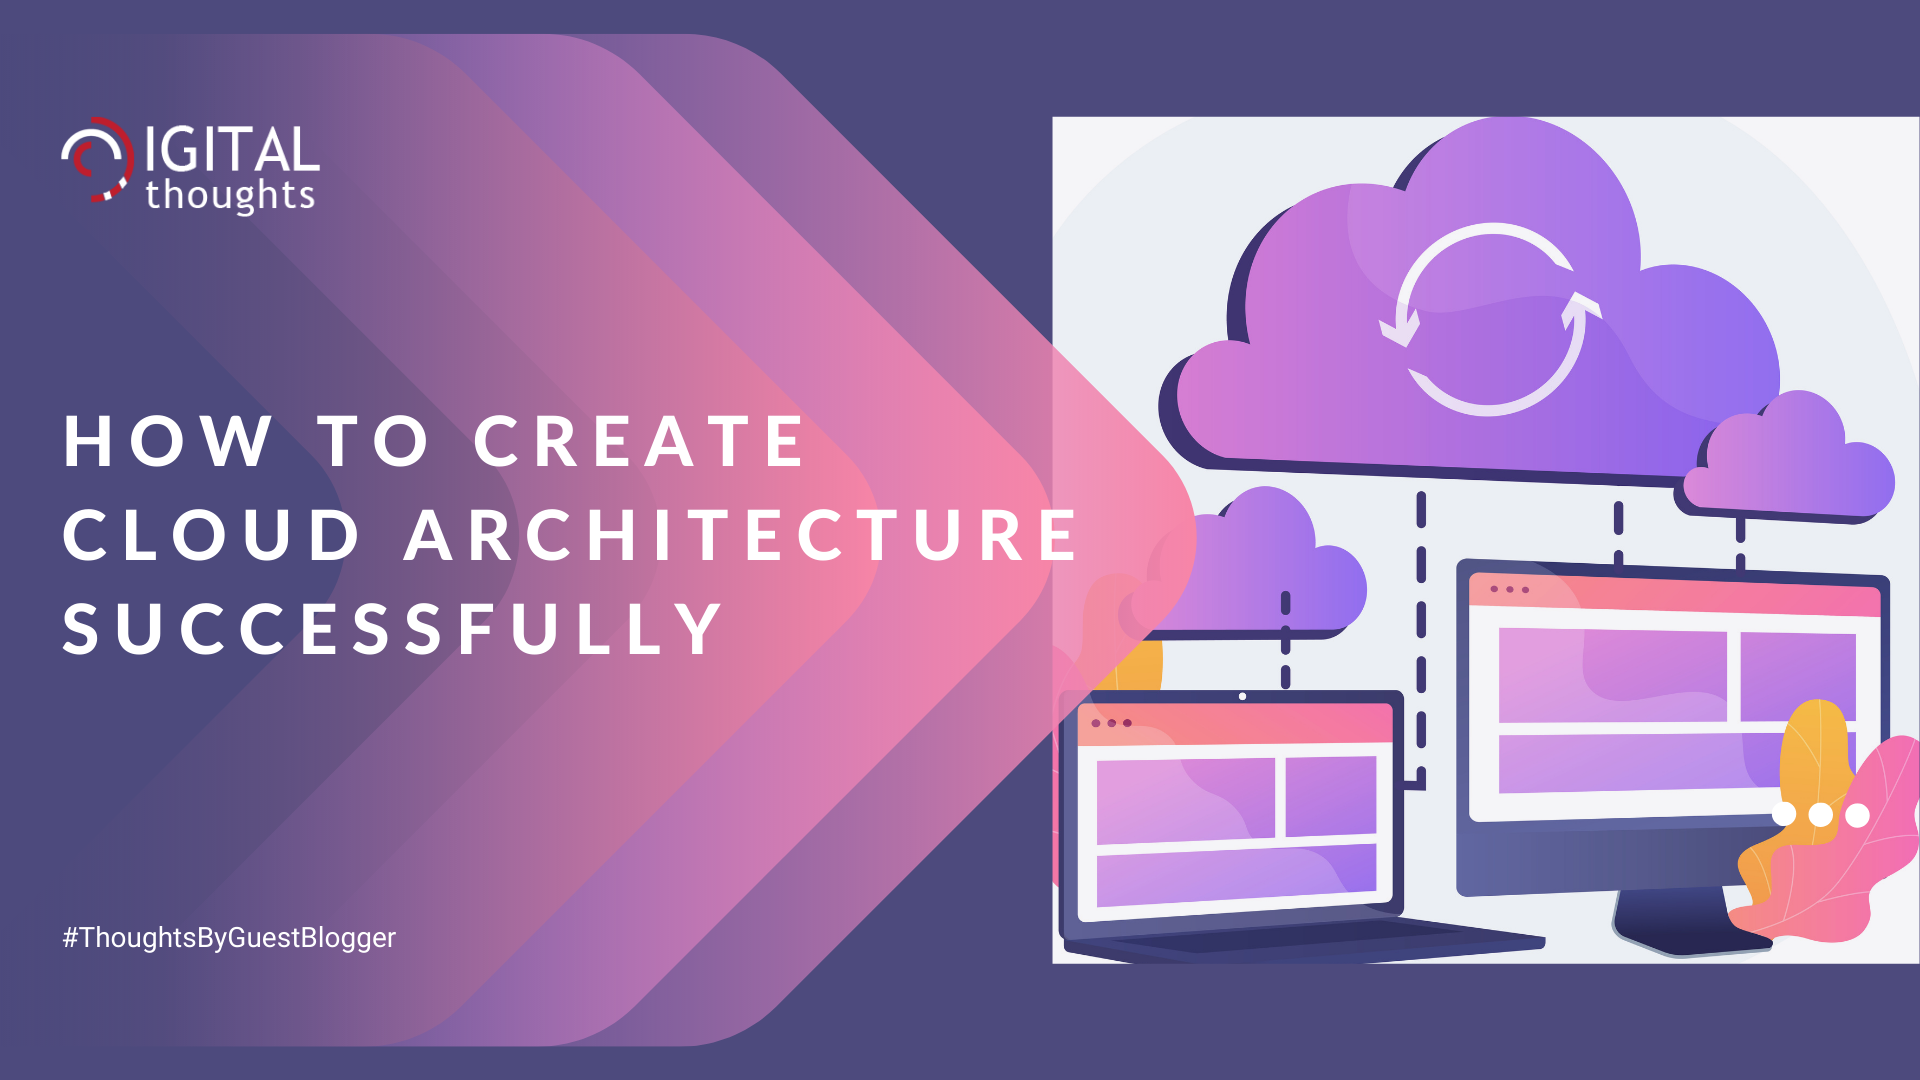 Innovative Ways to Create Cloud Architecture Successfully